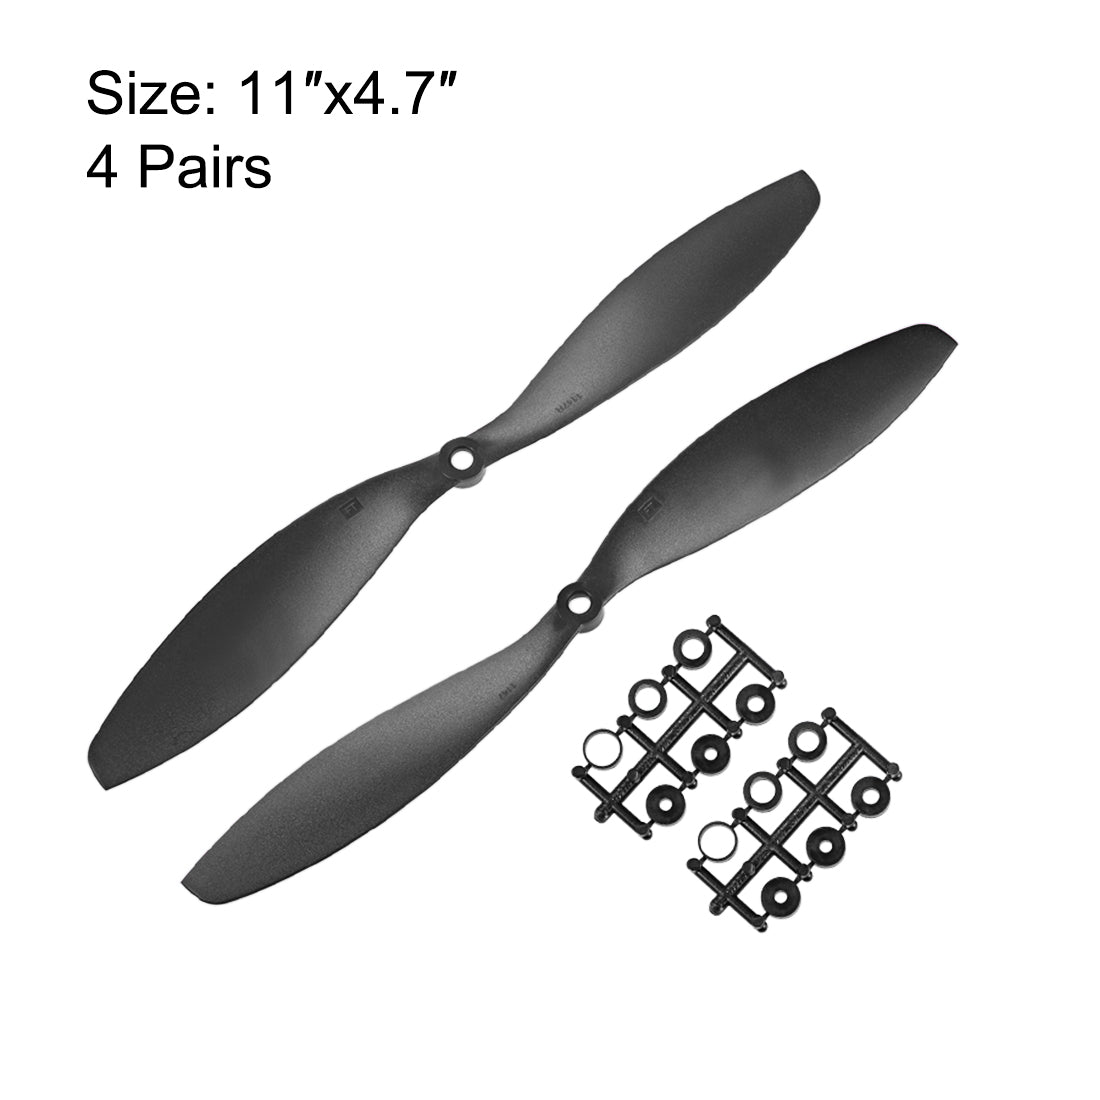 uxcell Uxcell RC Propellers CW CCW 1147 11x4.7 Inch 2-Vane Fixed-Wing for Airplane Toy, Nylon Black 4 Pair with Adapter Rings